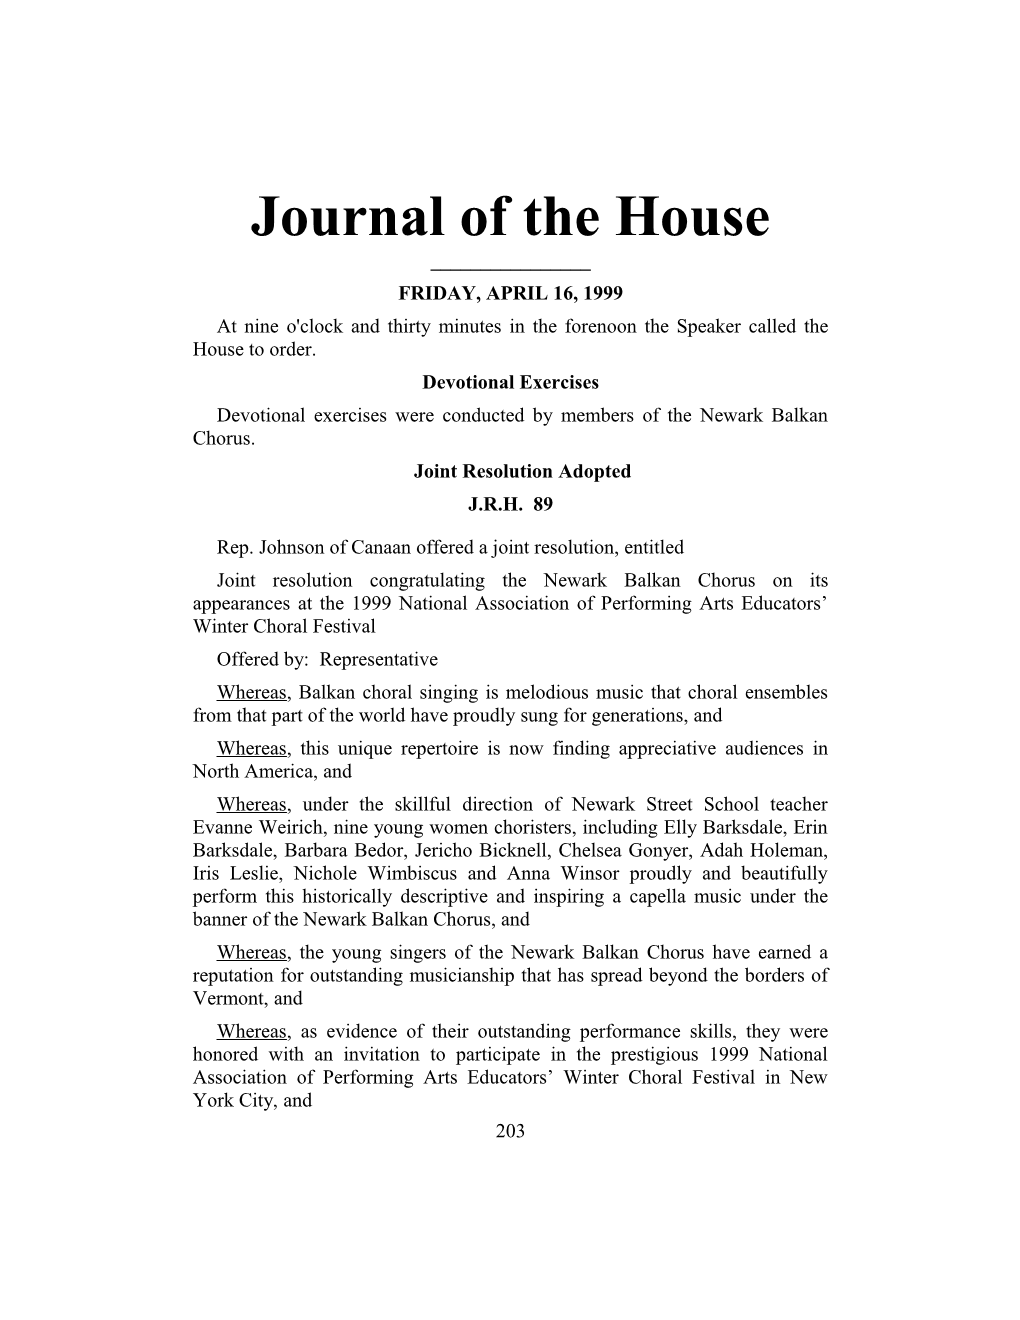 Journal of the House s4